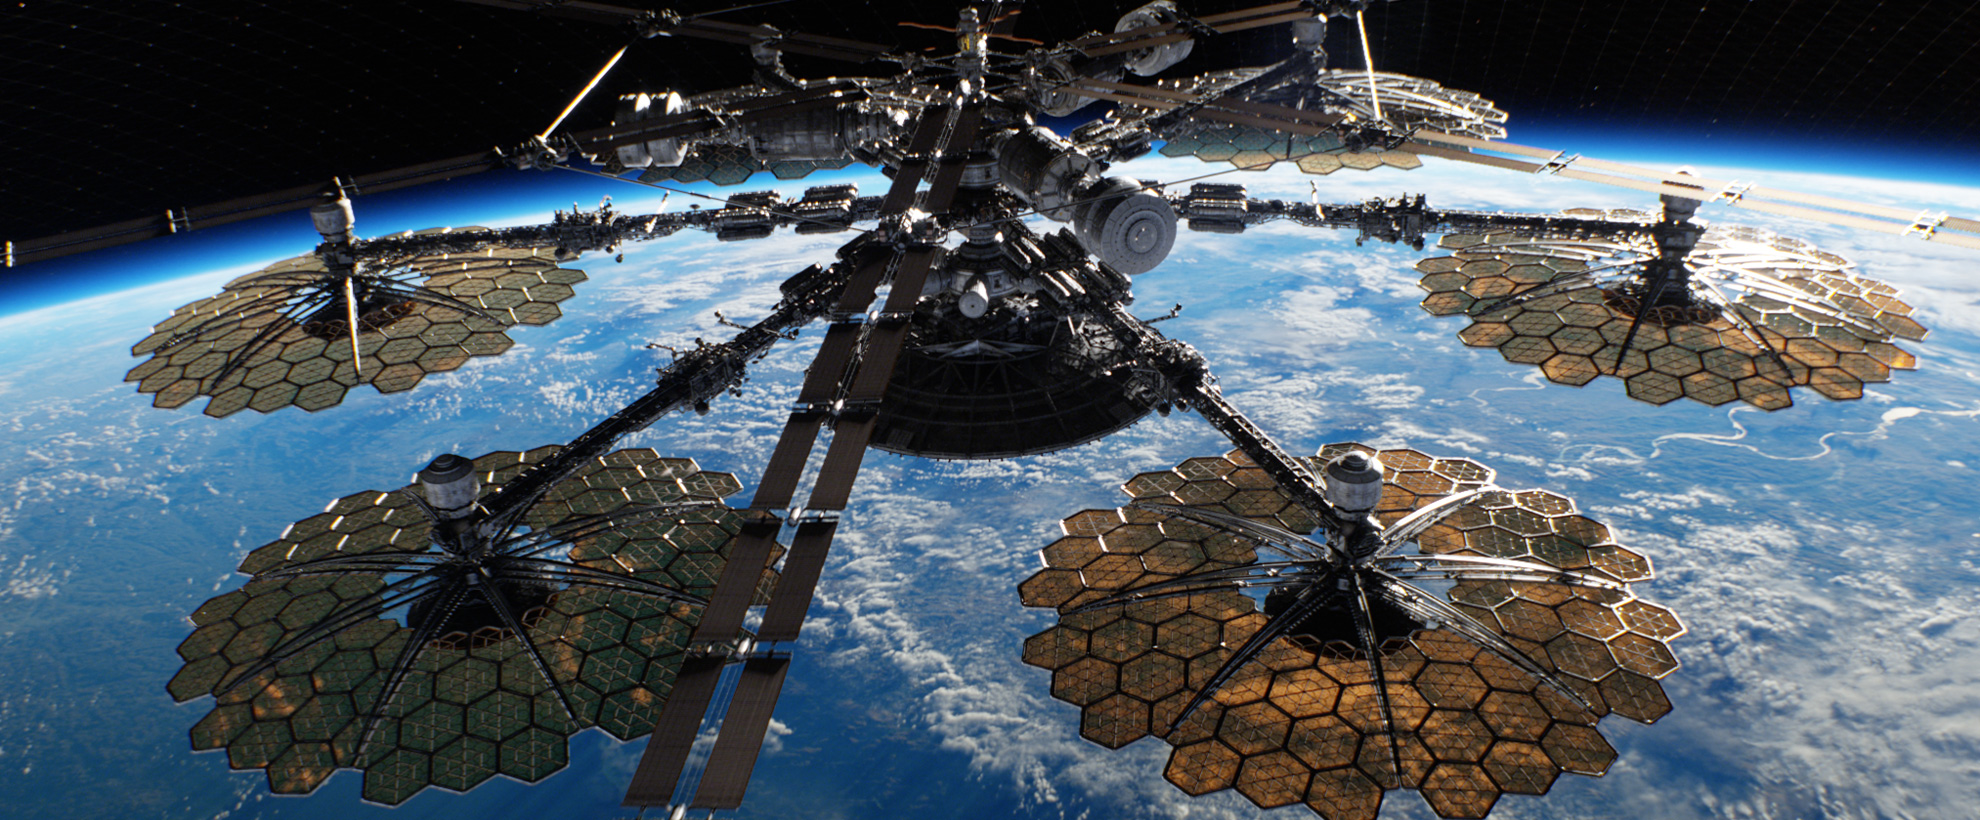 A large spaceship with solar panels above earth